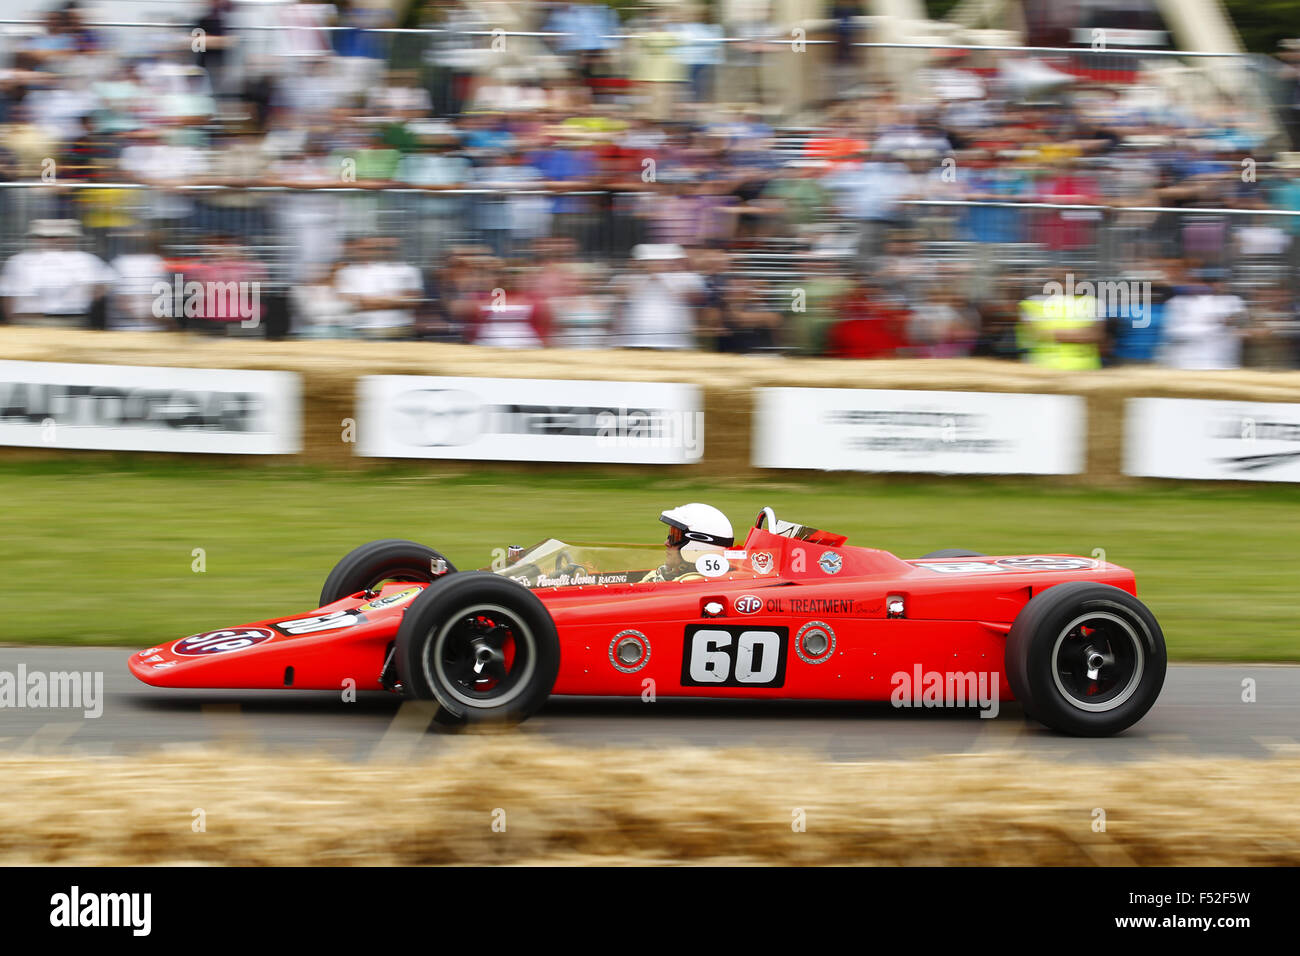 Racing car, Goodwood Festival of speed in 2011, formula racing cars, the 70s, Stock Photo